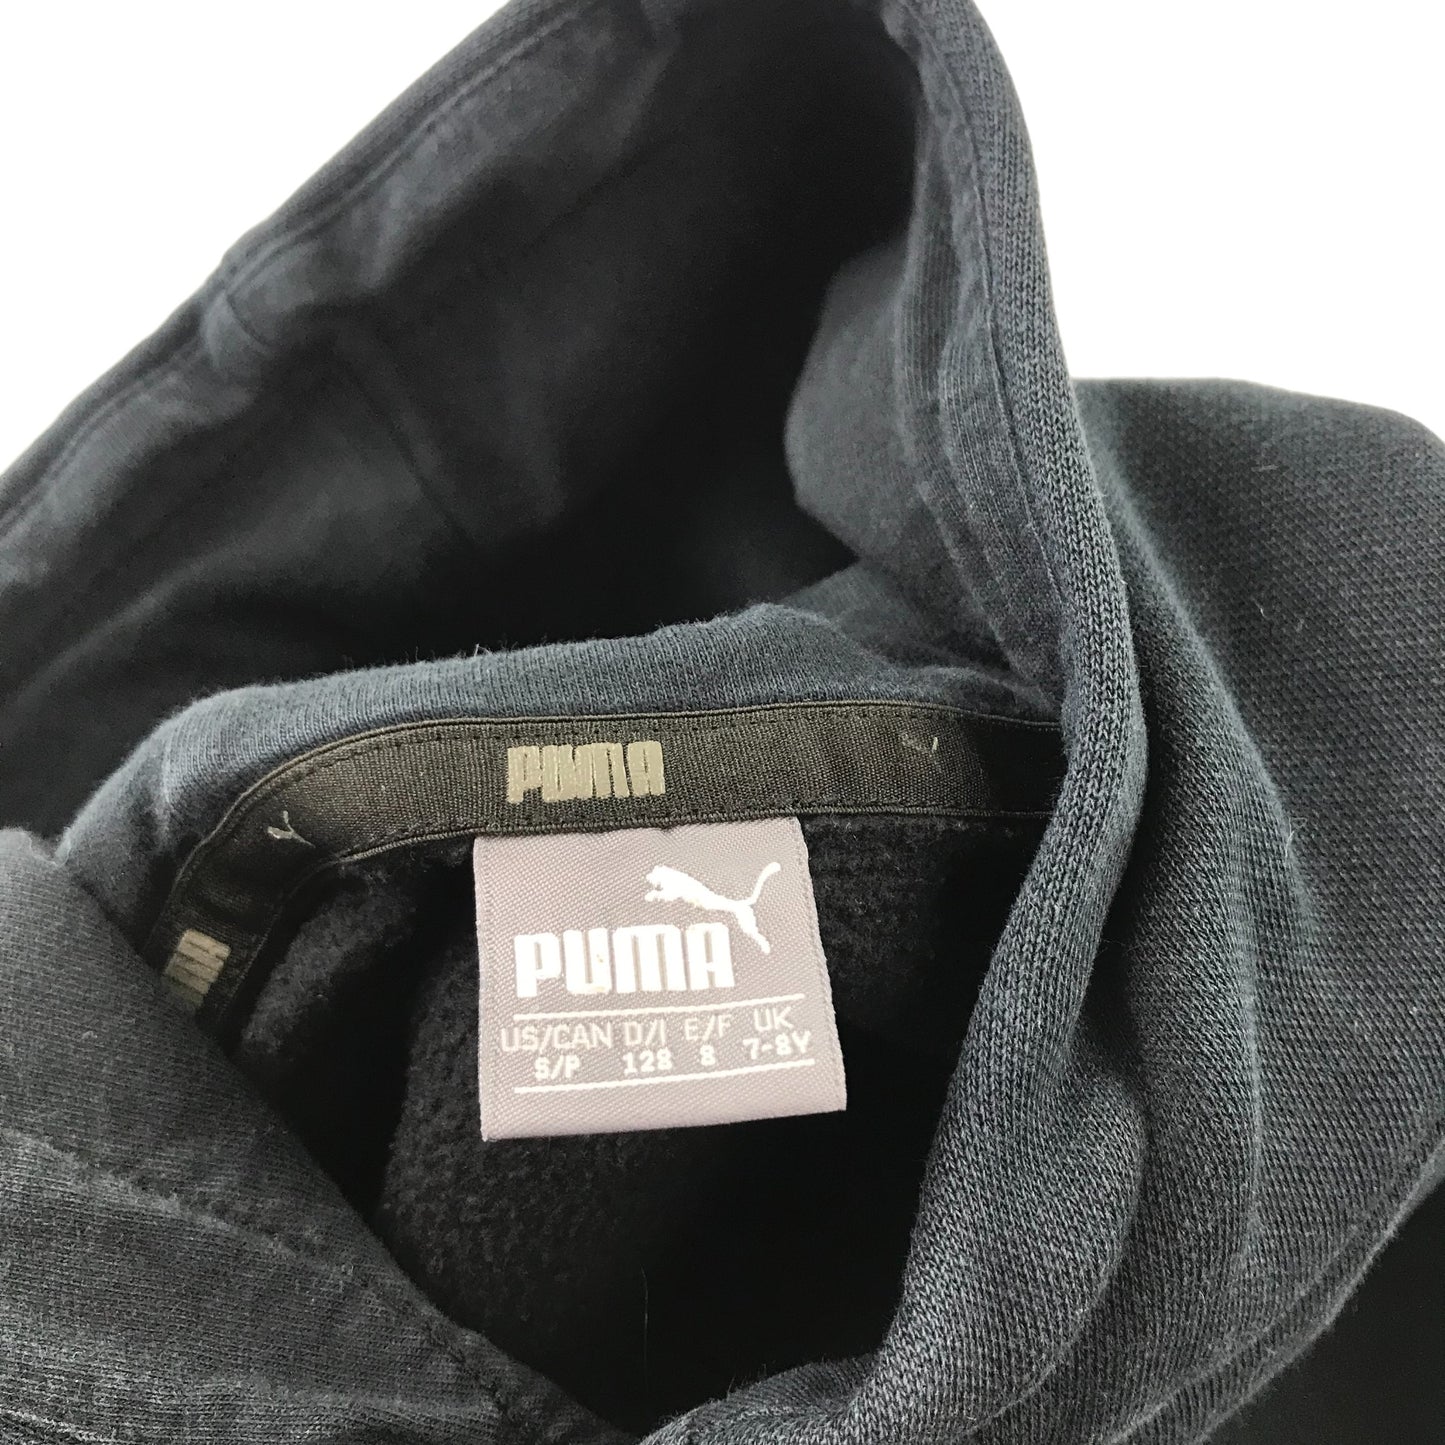 Puma hoodie 7-8 years black classic pullover with logo